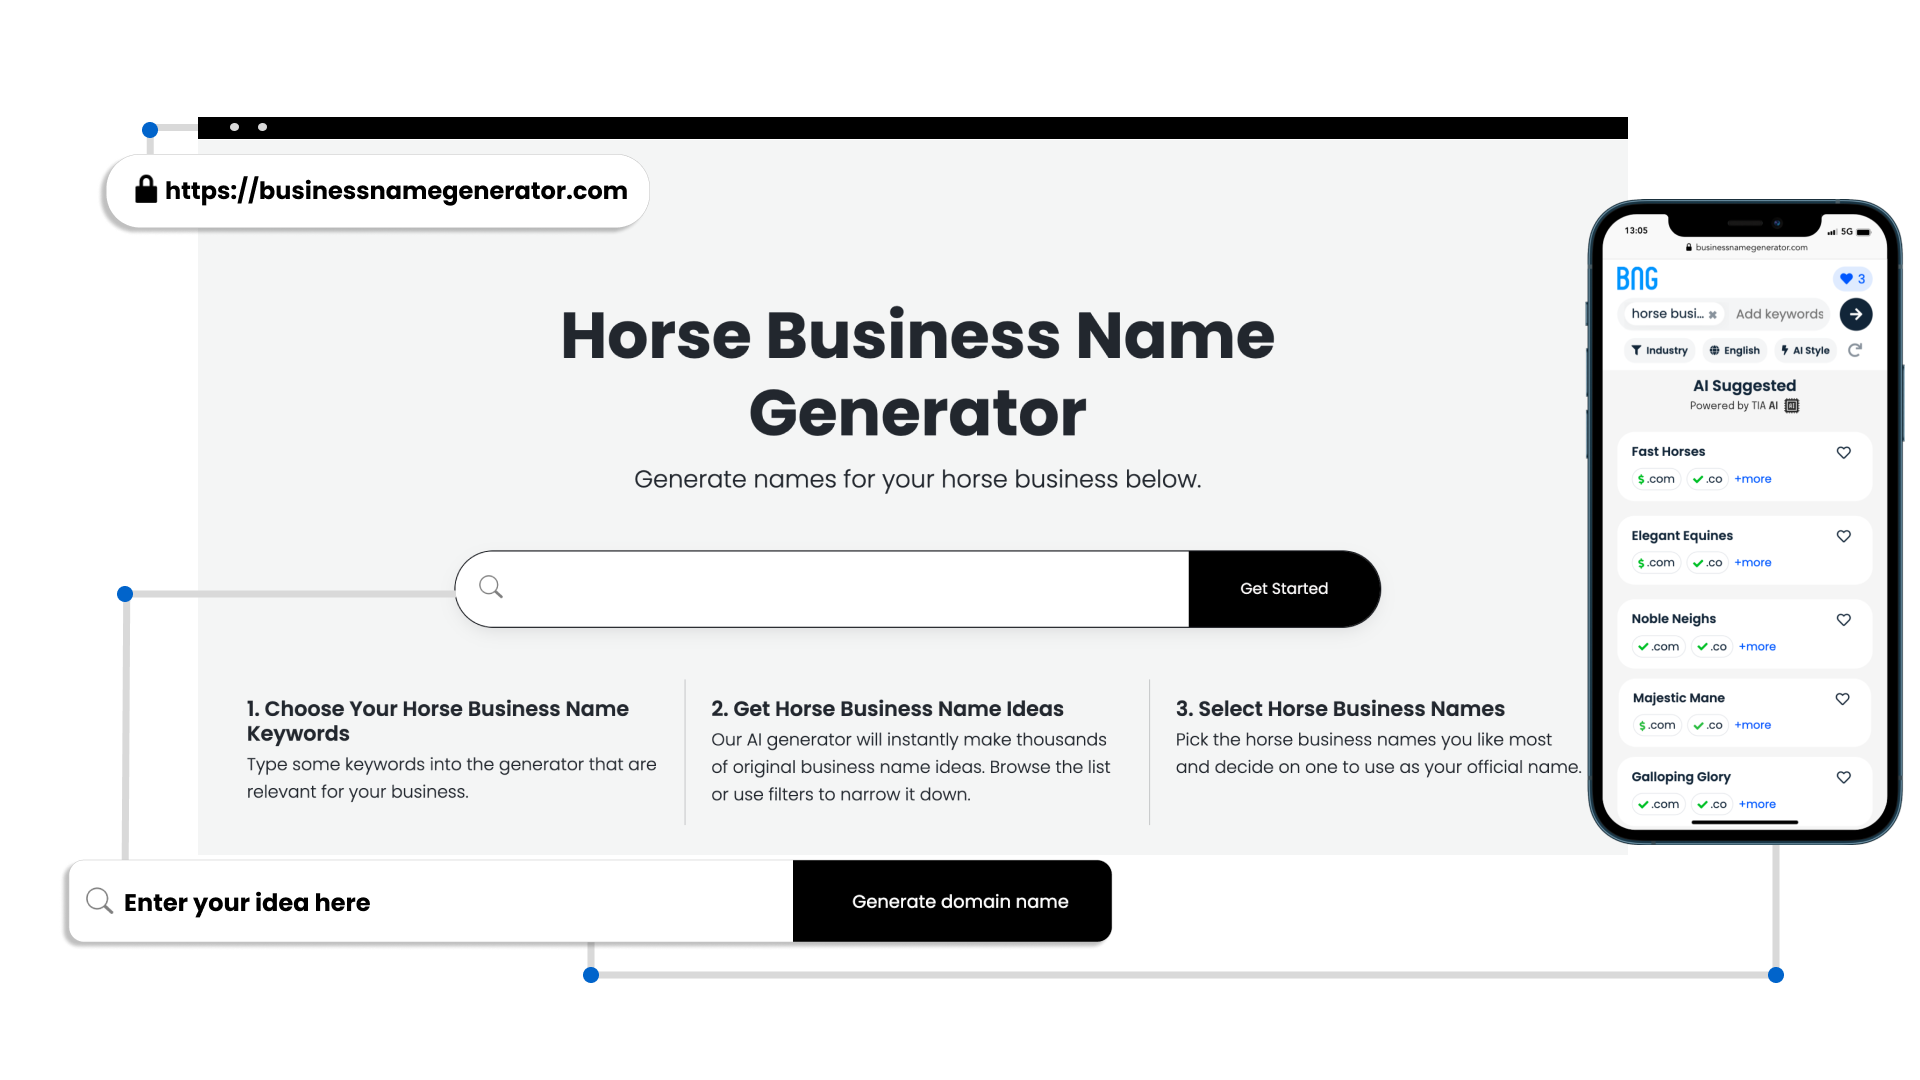 Horse Business Name Generator: Benefits When Starting a Business